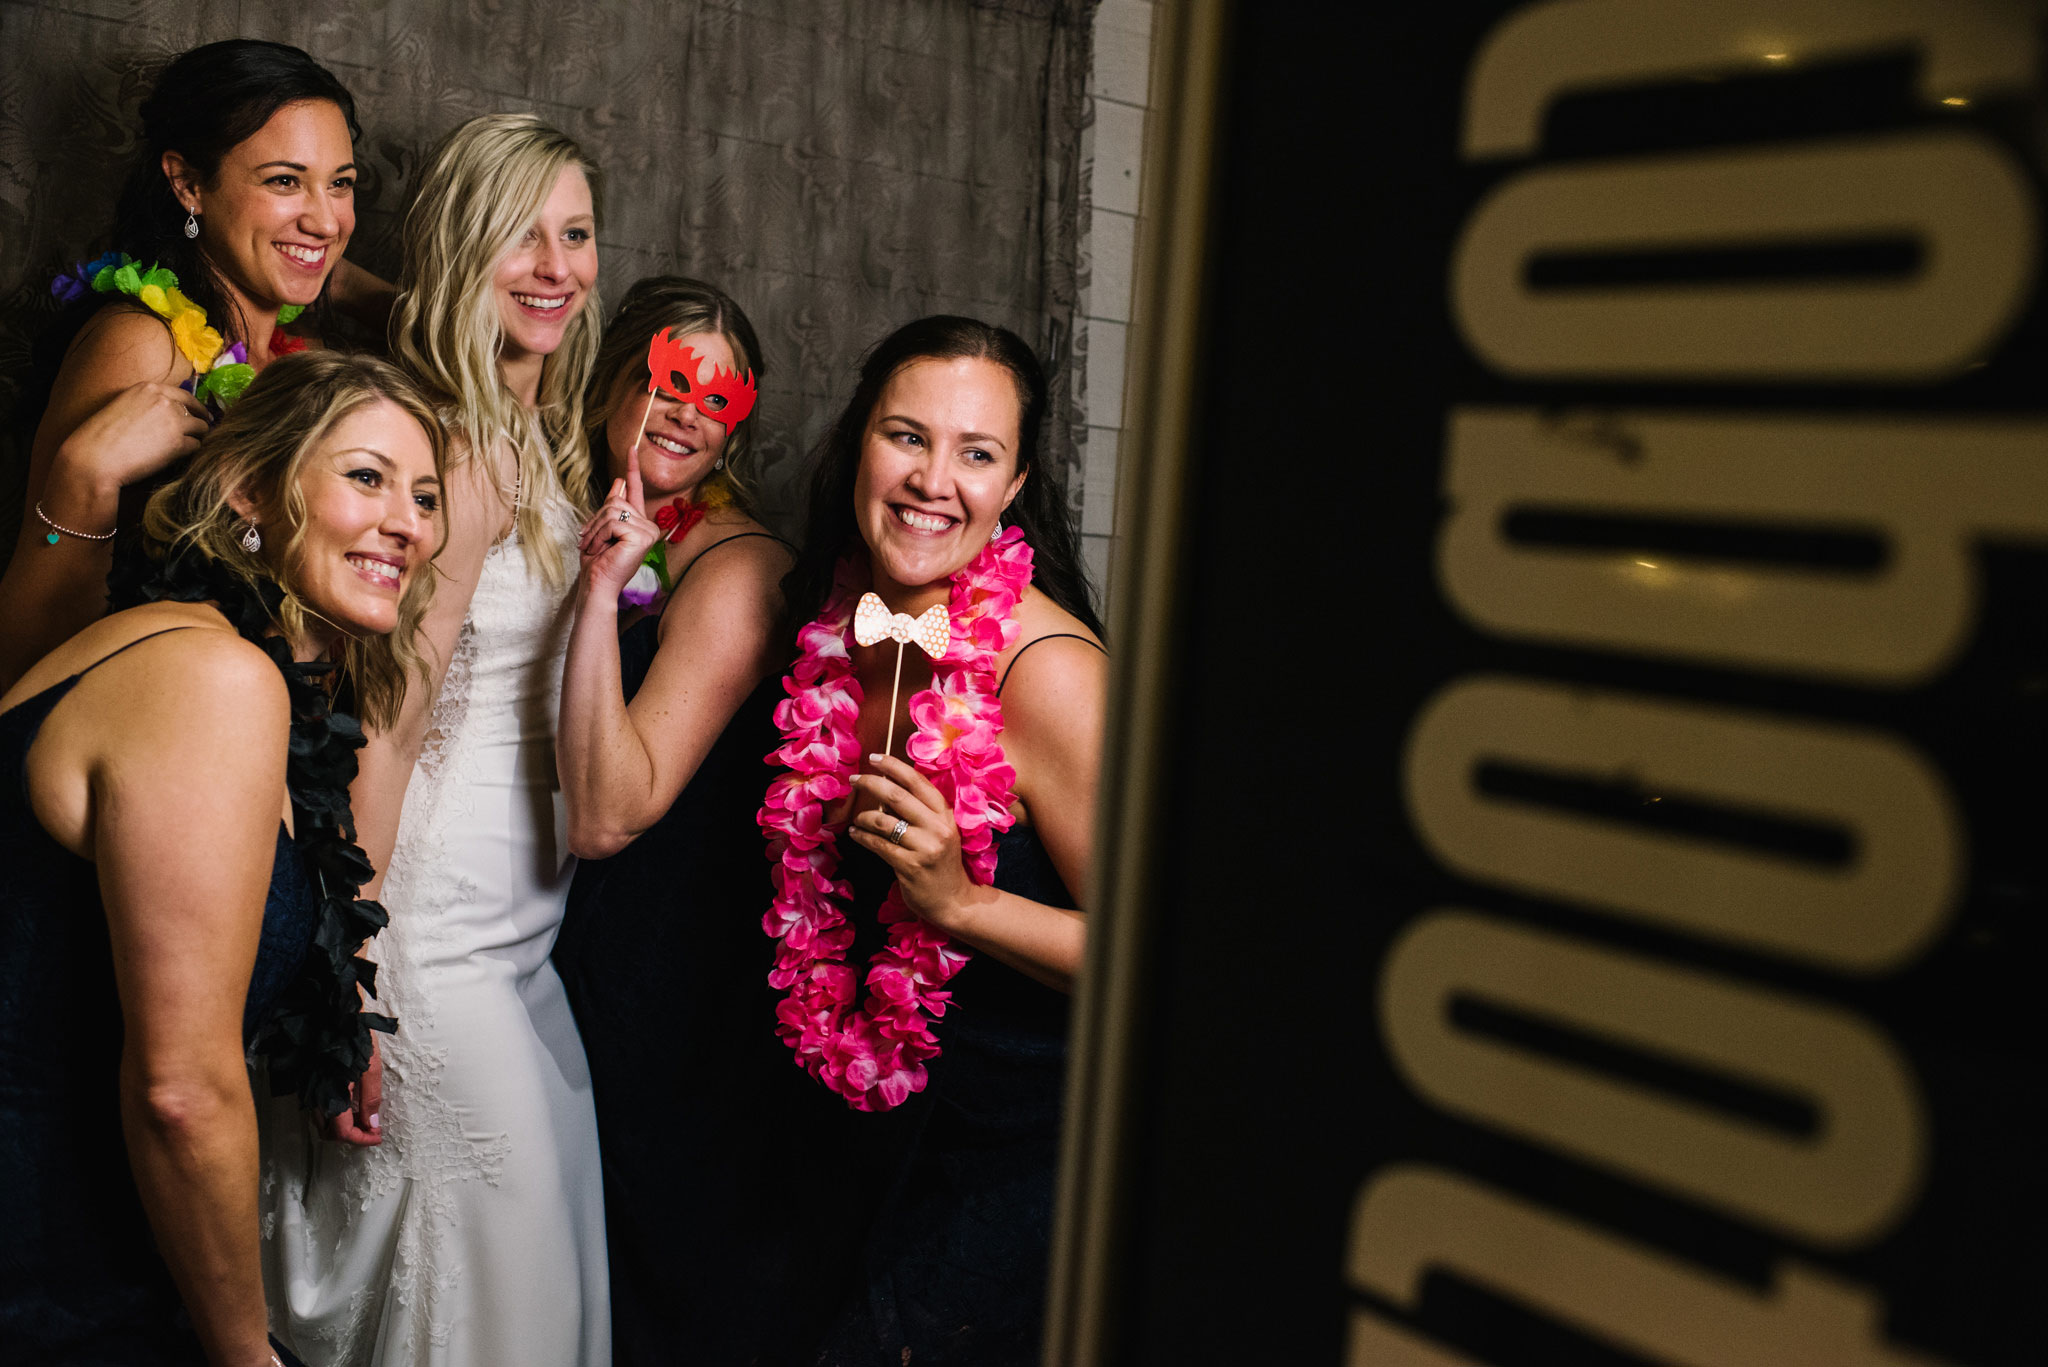 Bride and bridesmaid having fun in front of photo booth